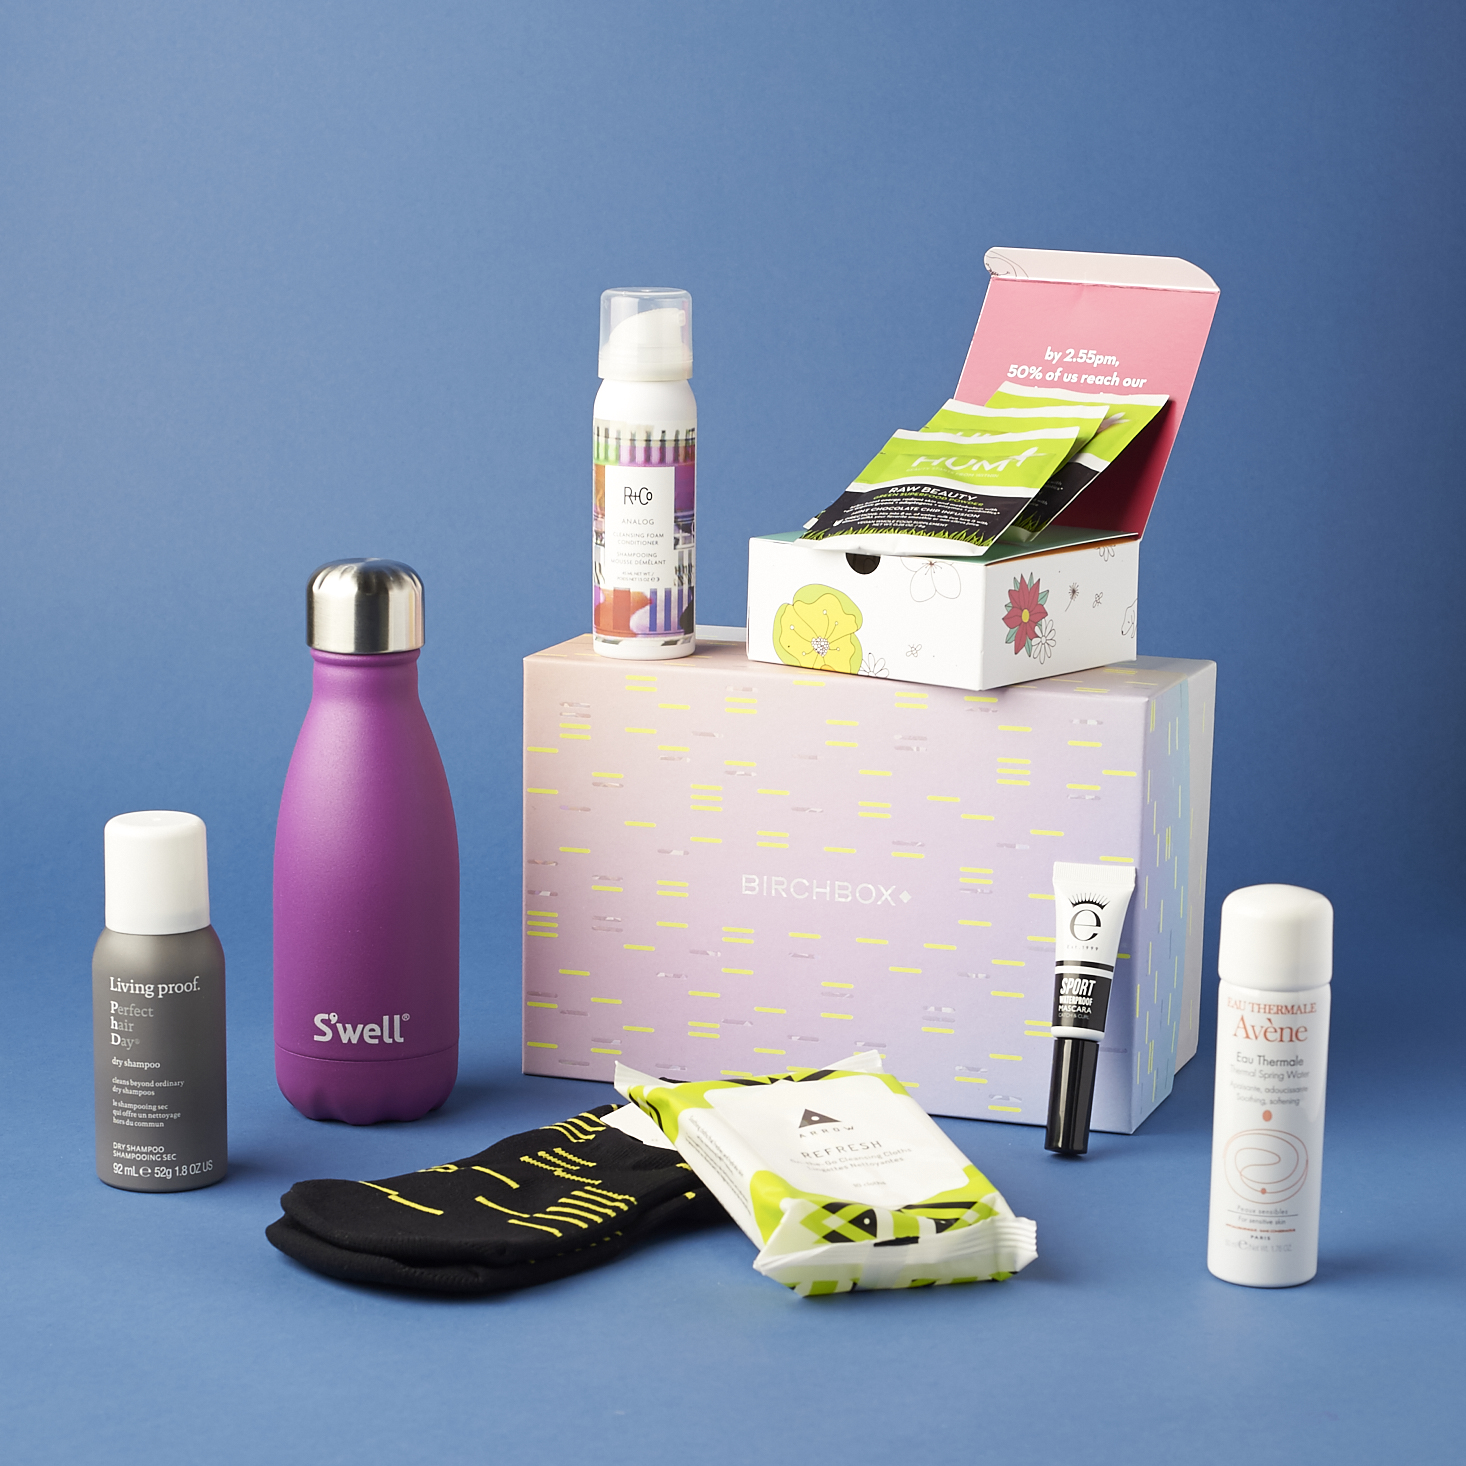 Birchbox-limited-edition-refresh-and-reset-box-january-2017-0031